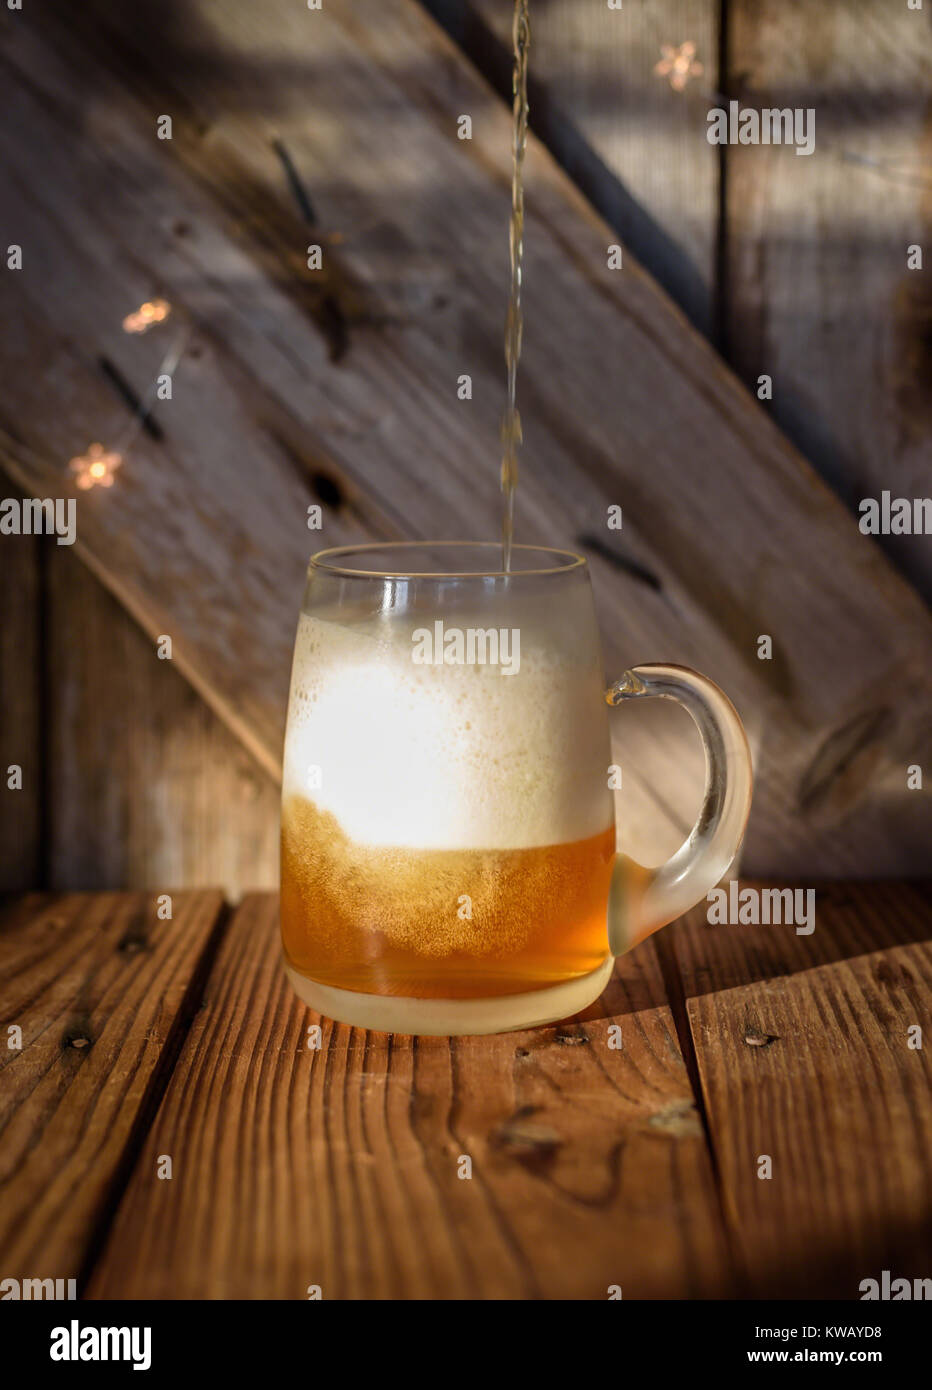 pouring beer into a large frosty beer mug on rustic barn wood table Stock Photo